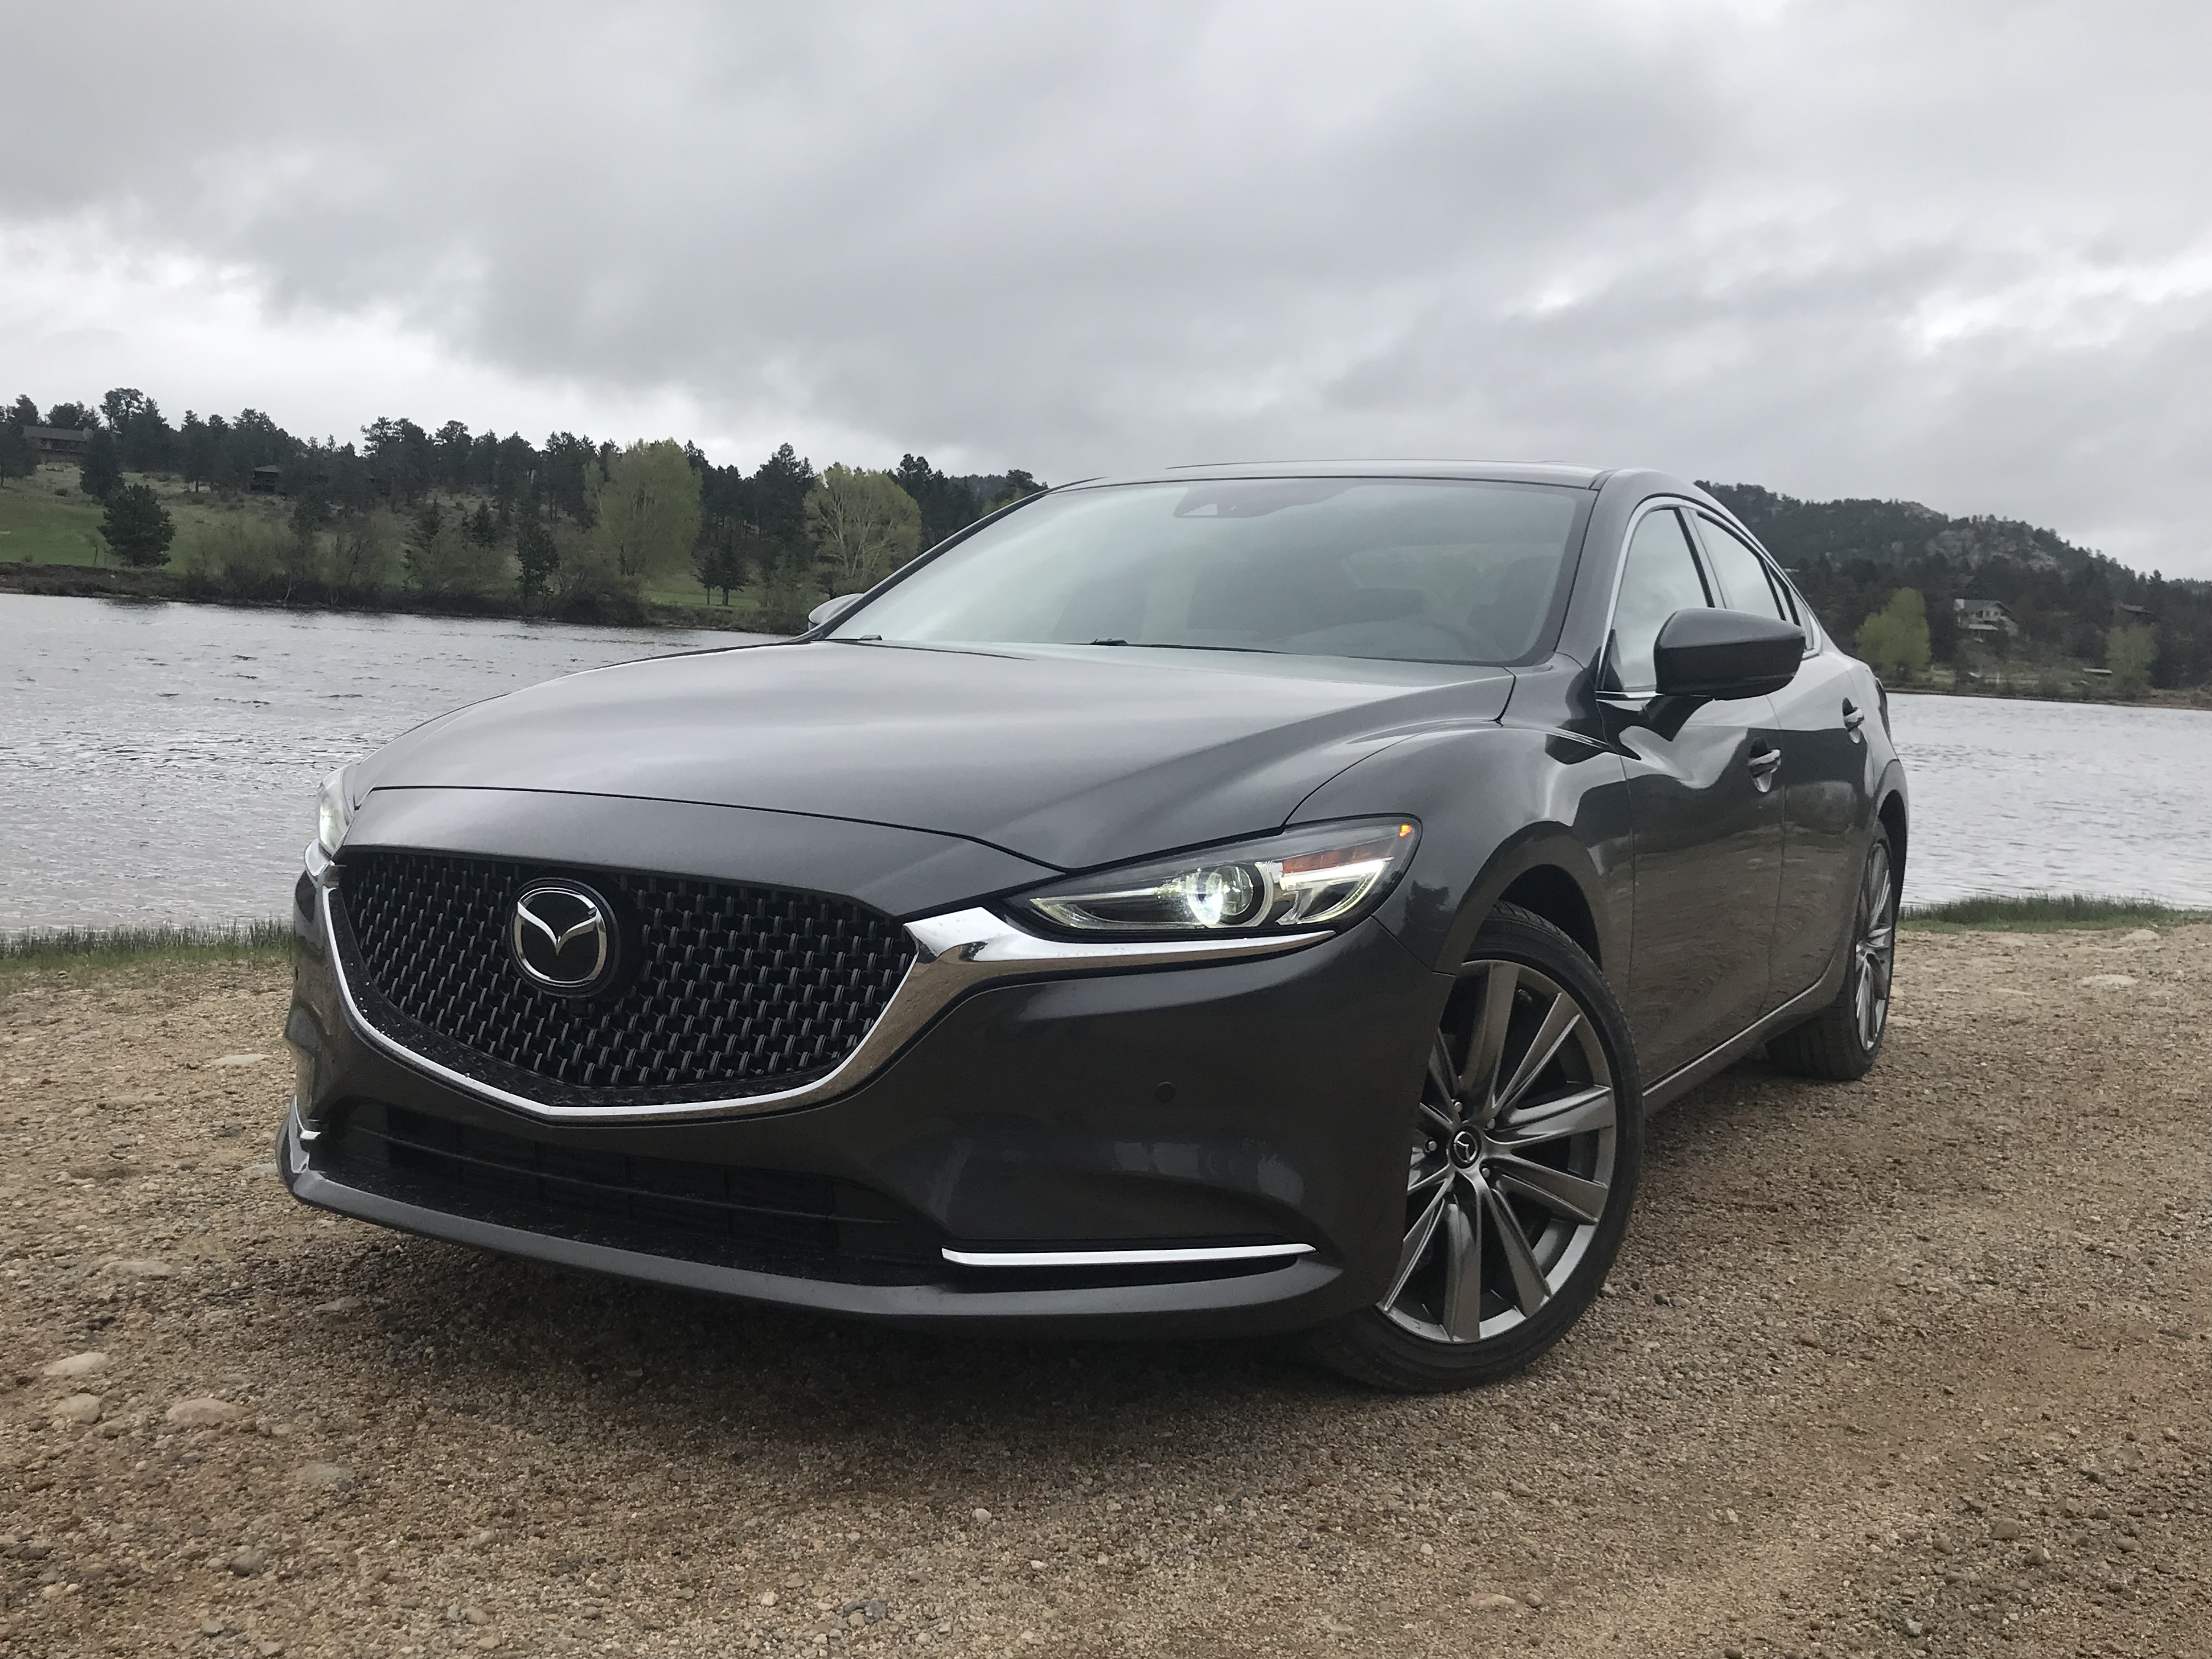 2018 Mazda 6 Turbo: Is There Now Some Go to Match the Show? [Review] - The  Fast Lane Car